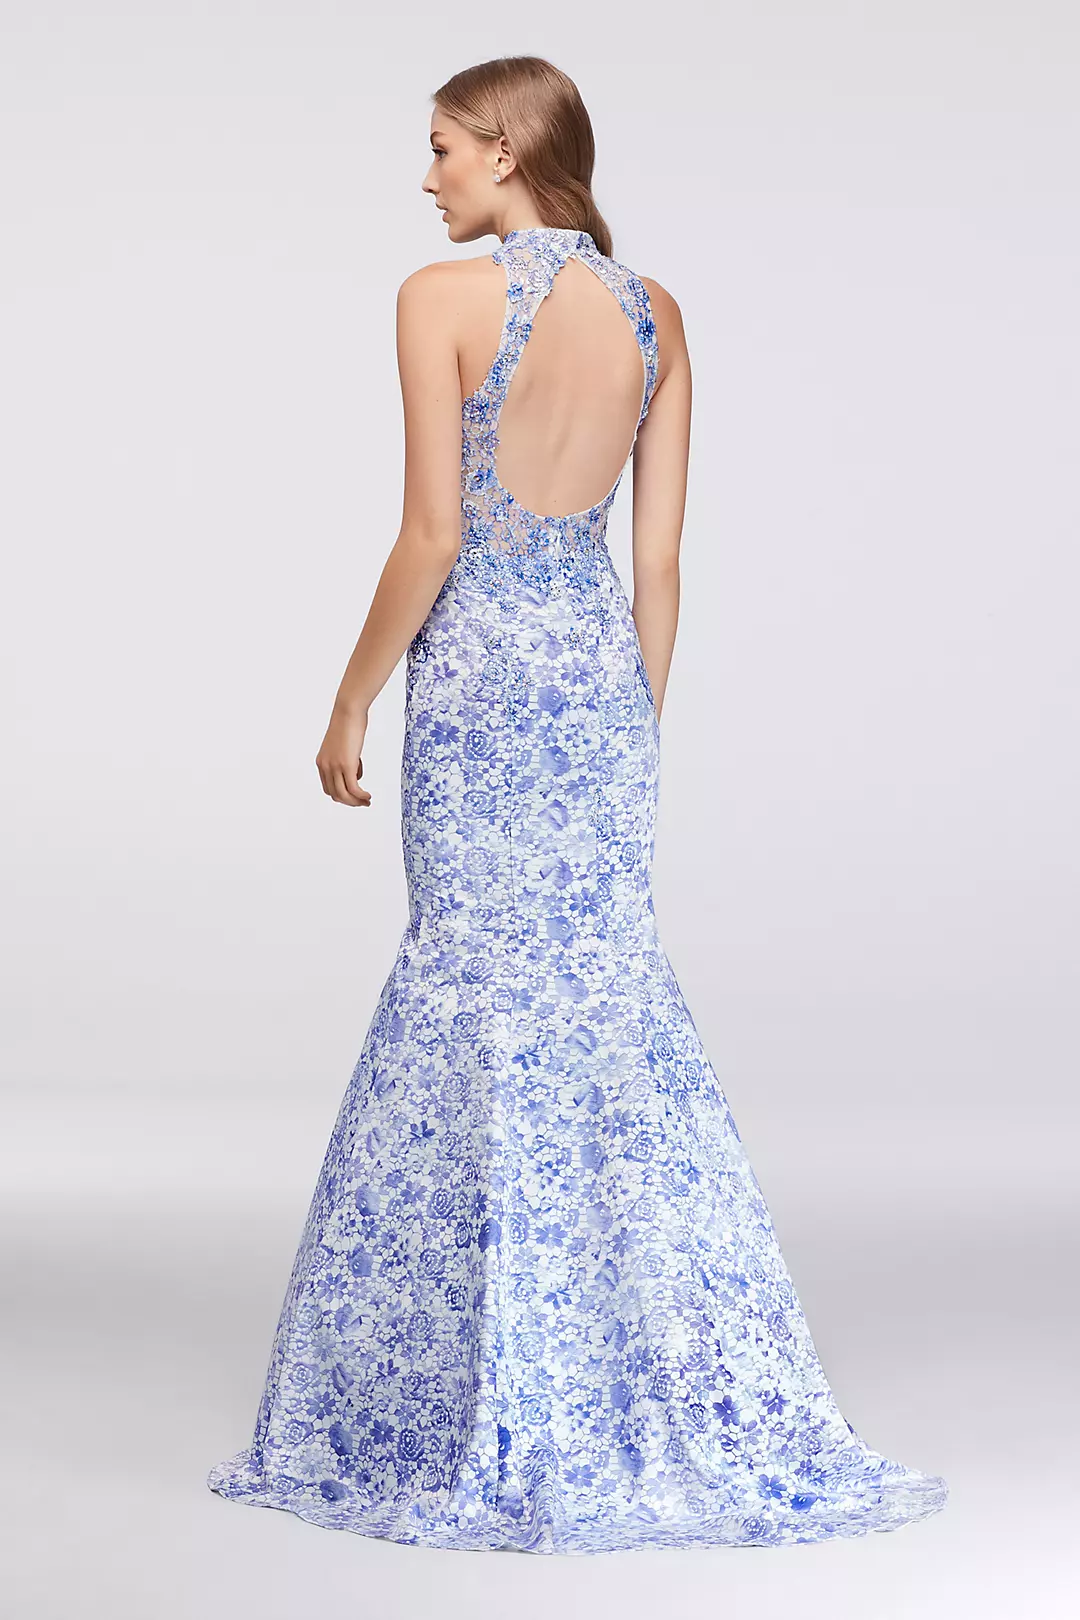 Lace-Print Mermaid Dress with Beaded Appliques Image 2